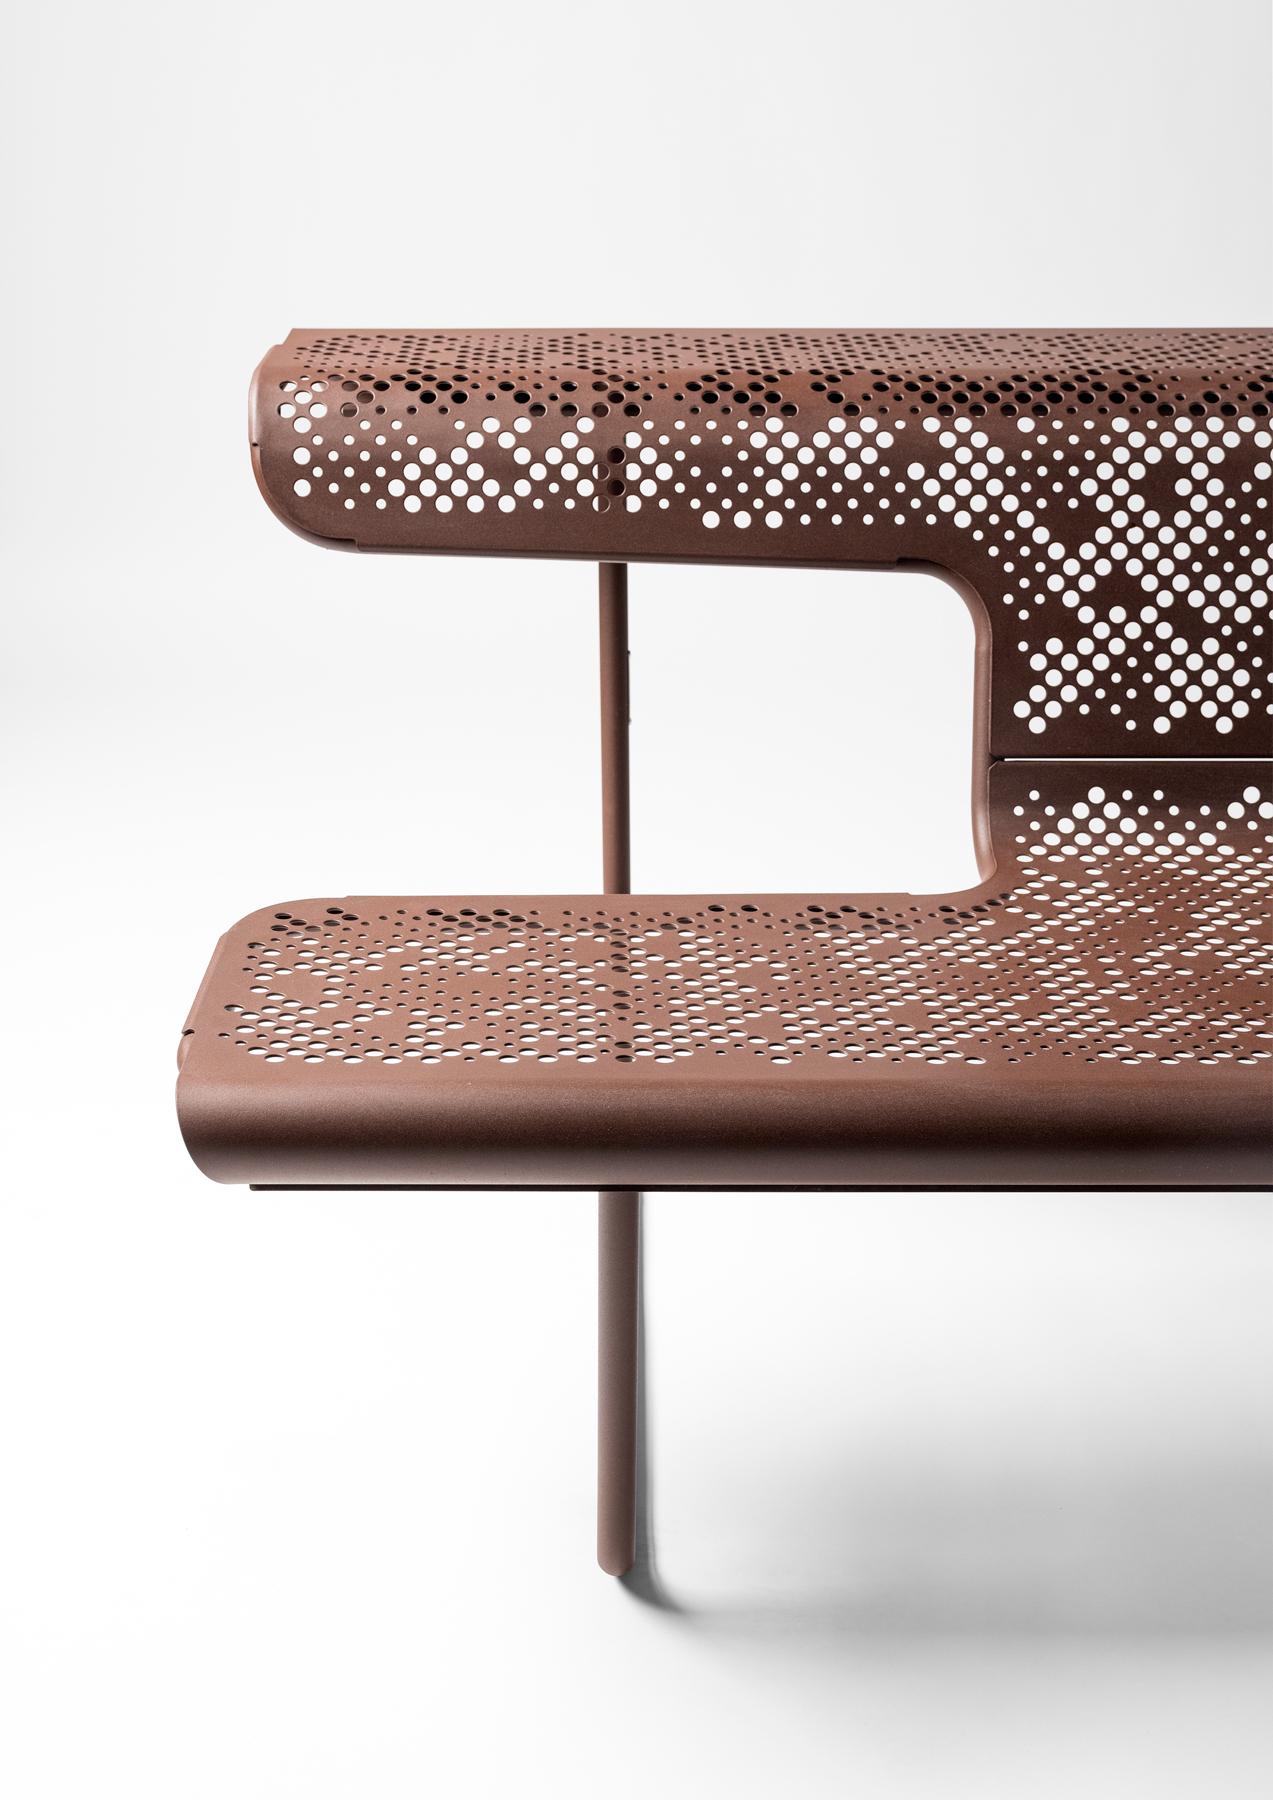 Interior and exterior bench designed by Alfredo Häberli.
Manufactured by BD Barcelona (Spain).

Steel tube legs and perforated steel sheet seats with a cataphoresis covering and painted with a polyester resin, in either bronze or silver grey.

Here